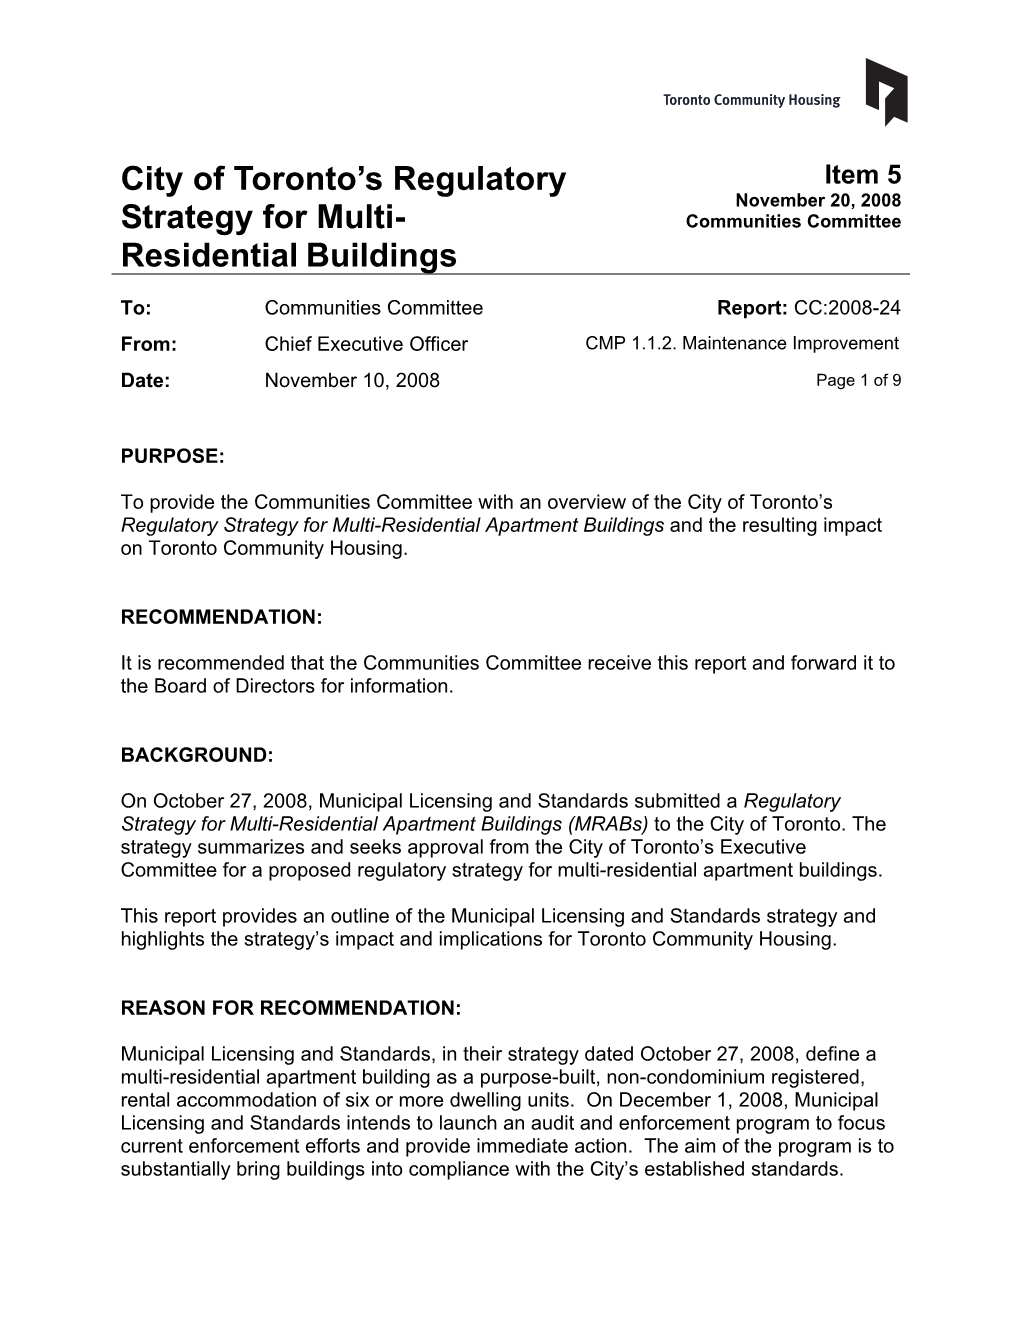 City of Toronto's Regulatory Strategy for Multi- Residential Buildings